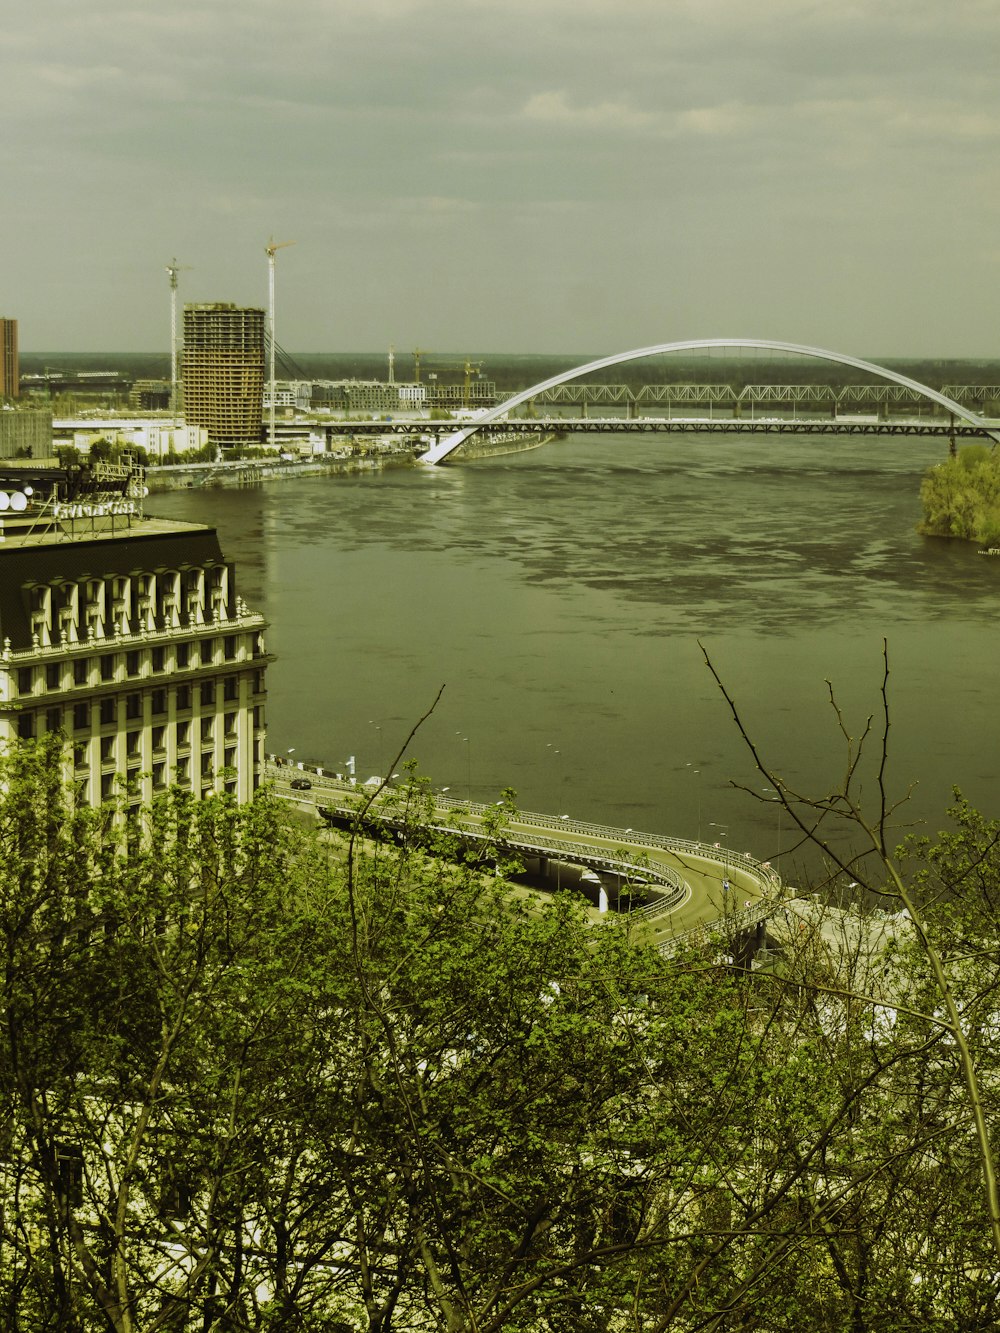 a view of a bridge over a river with a bridge in the background